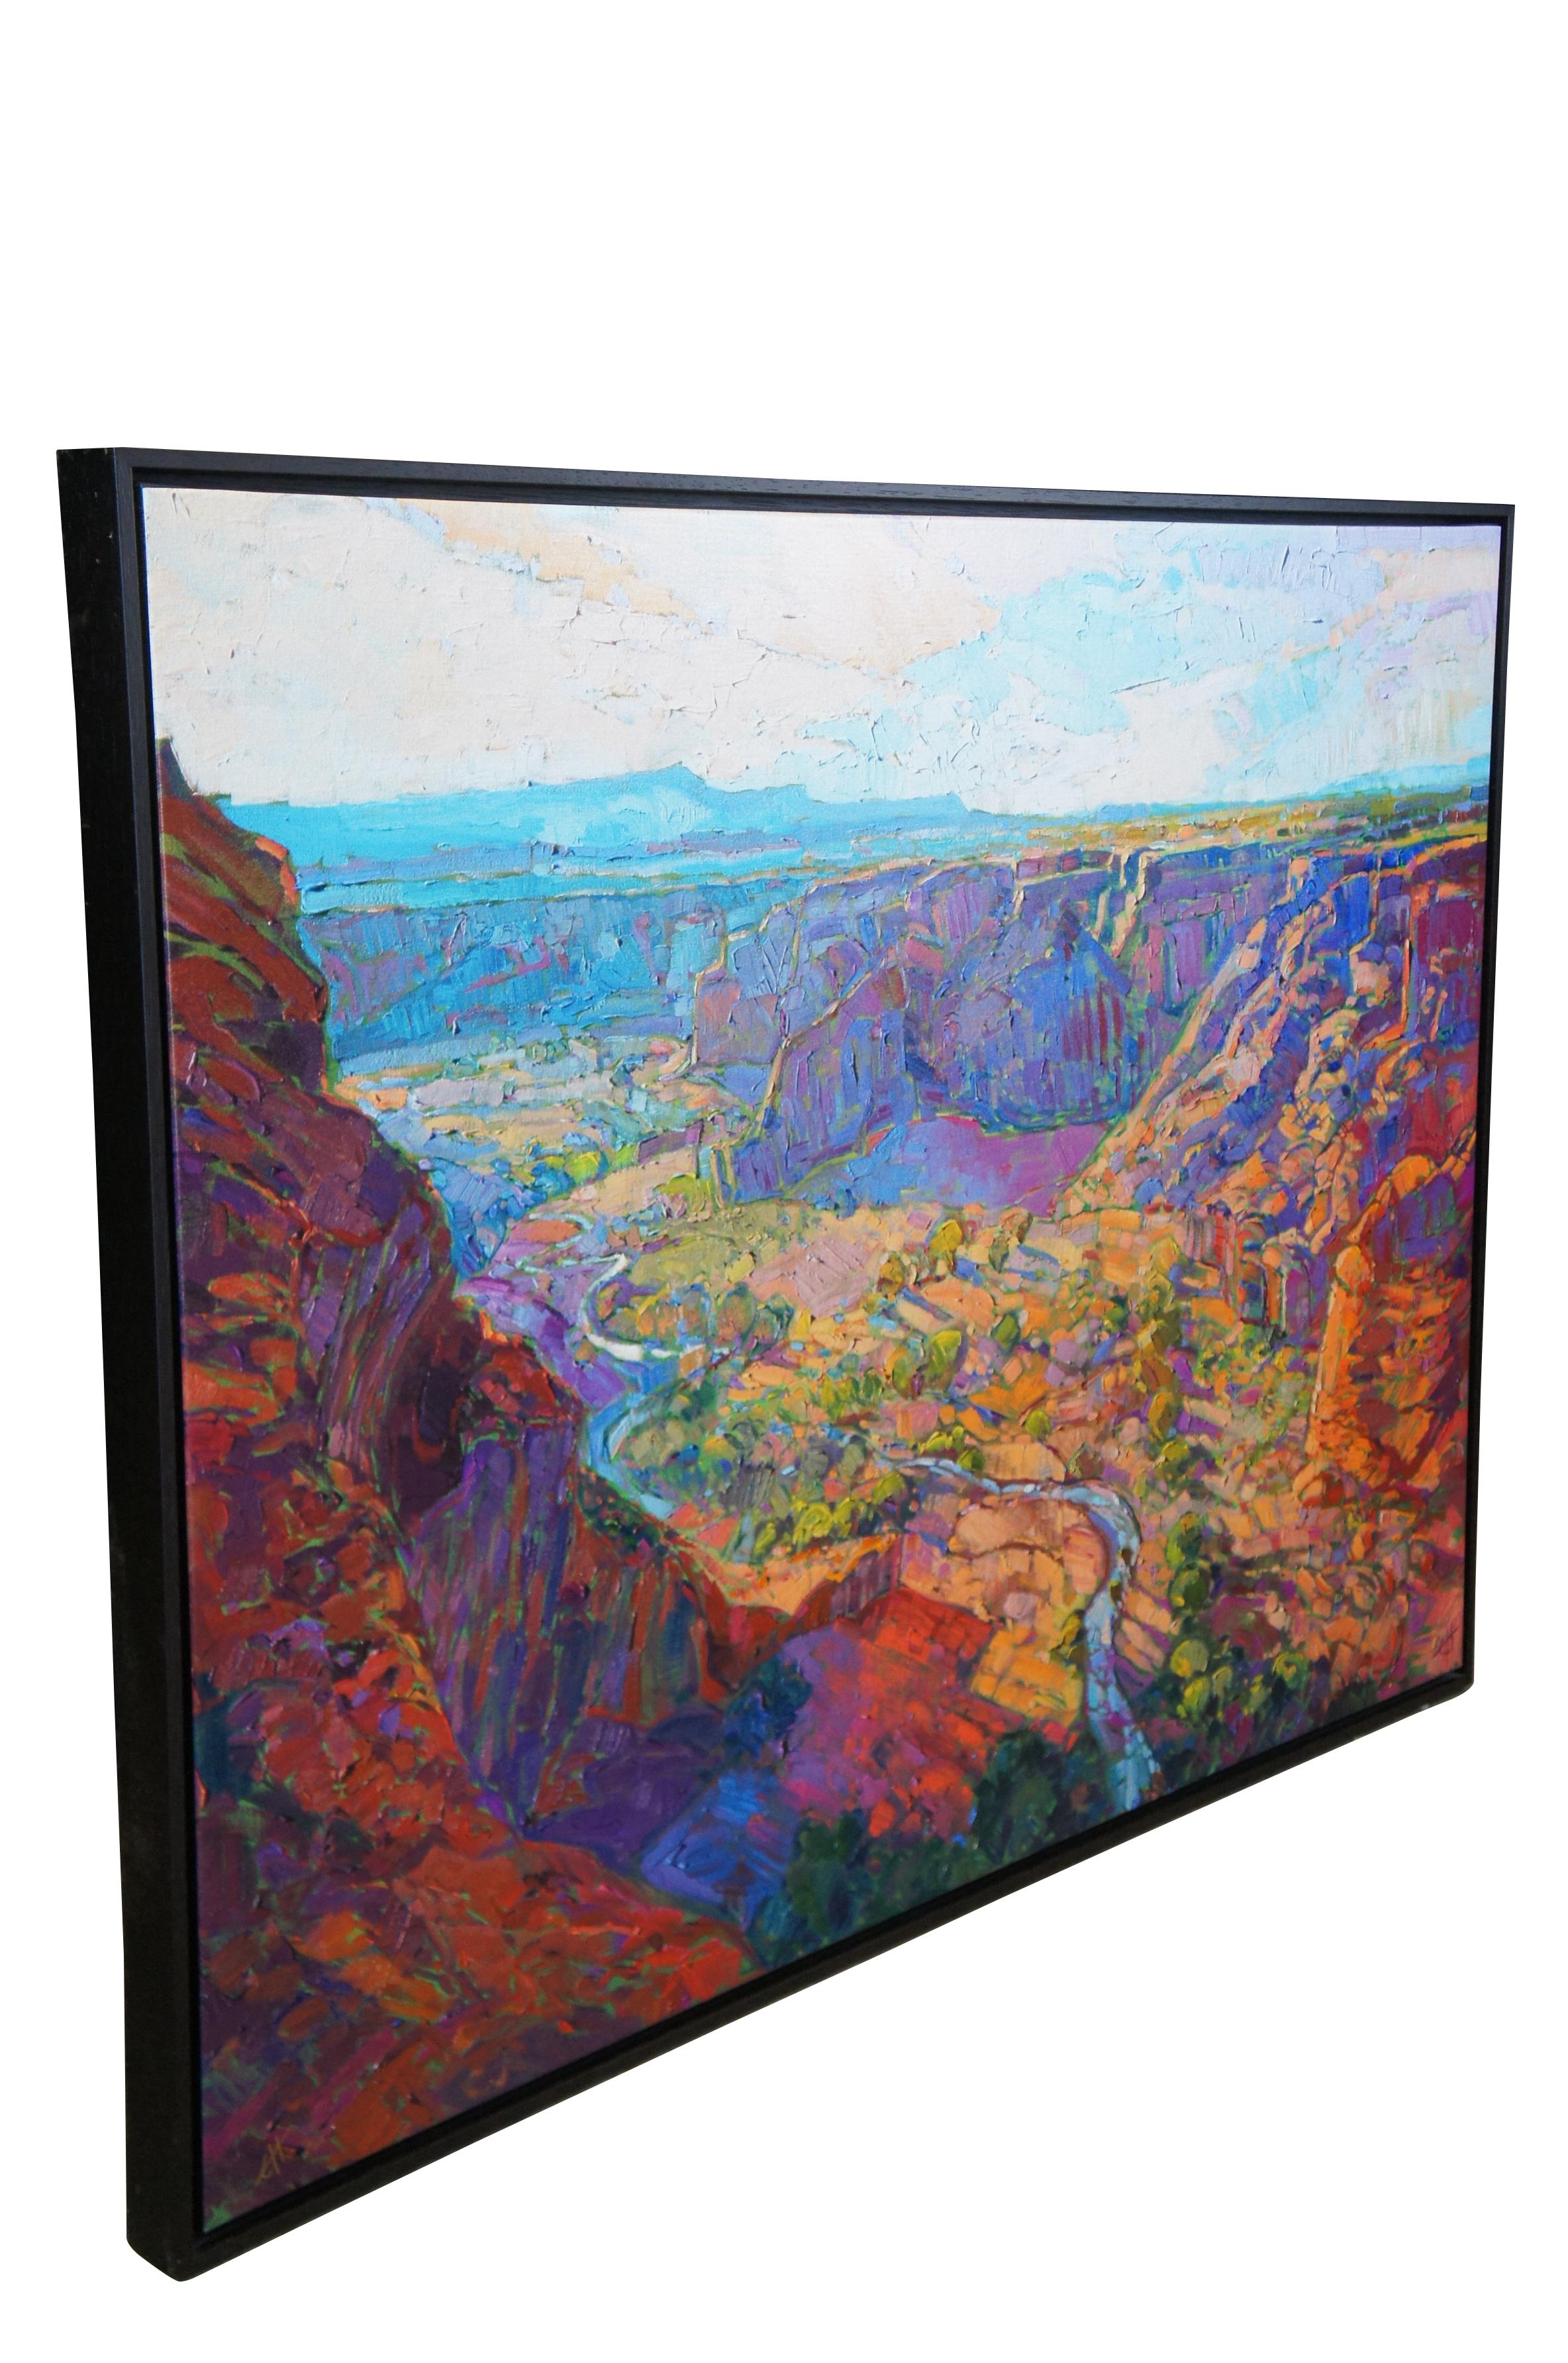 The recognizably rainbow hues of the Grand Canyon pop from the canvas in this oil painting by American impressionist Erin Hanson MSRP $2000

